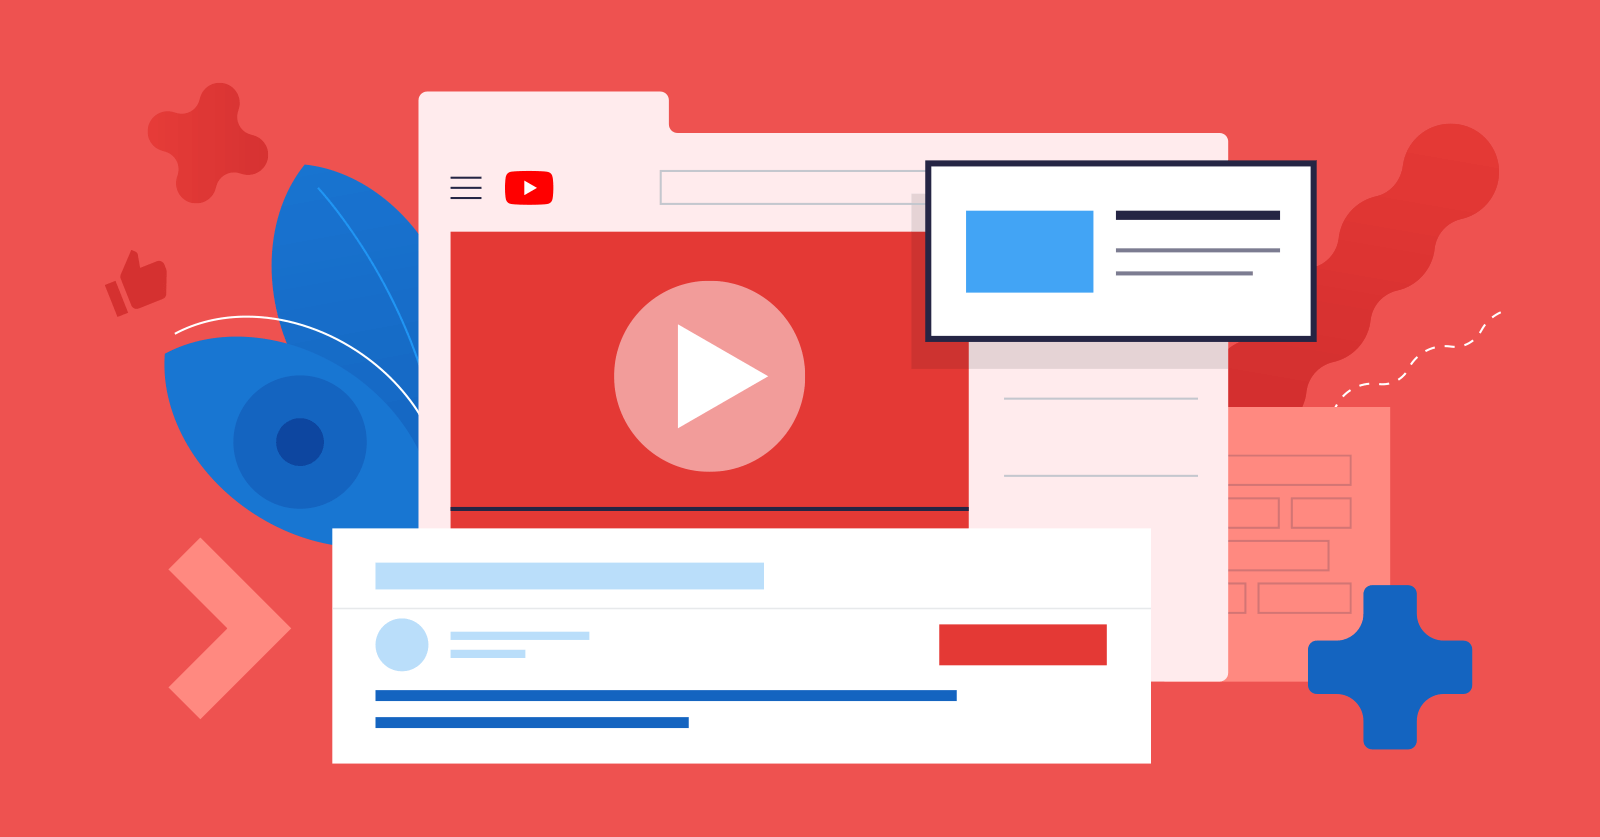 How to increase YouTube views: 6 tricks tested for 2021